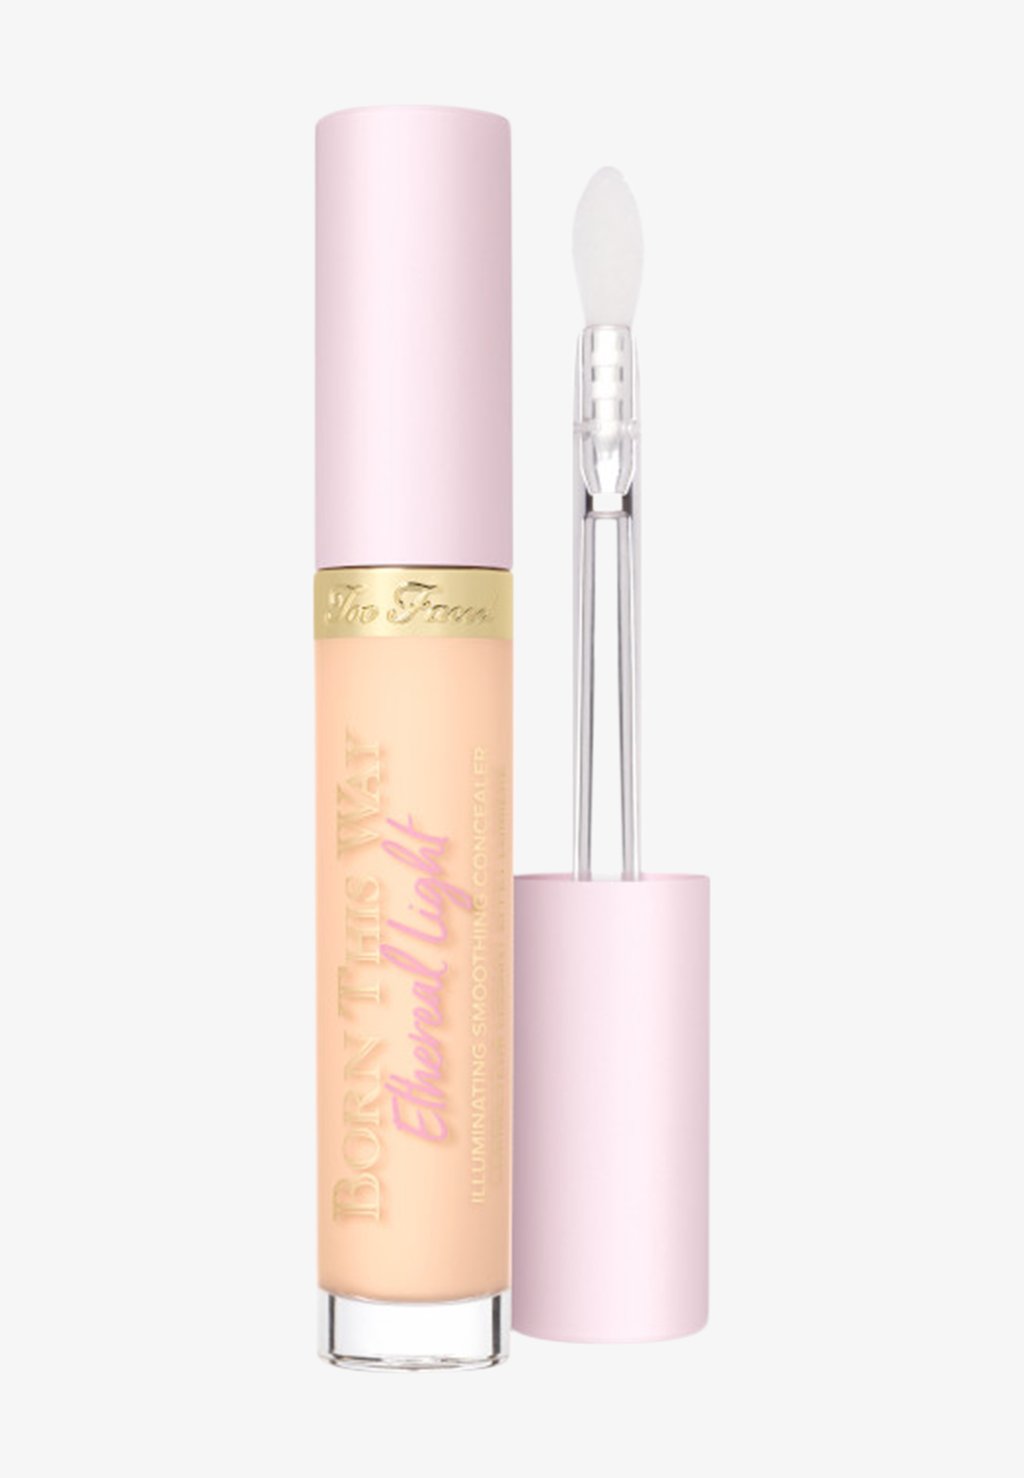 Консилер BORN THIS WAY ETHEREAL LIGHT CONCEALER Too Faced, цвет buttercup